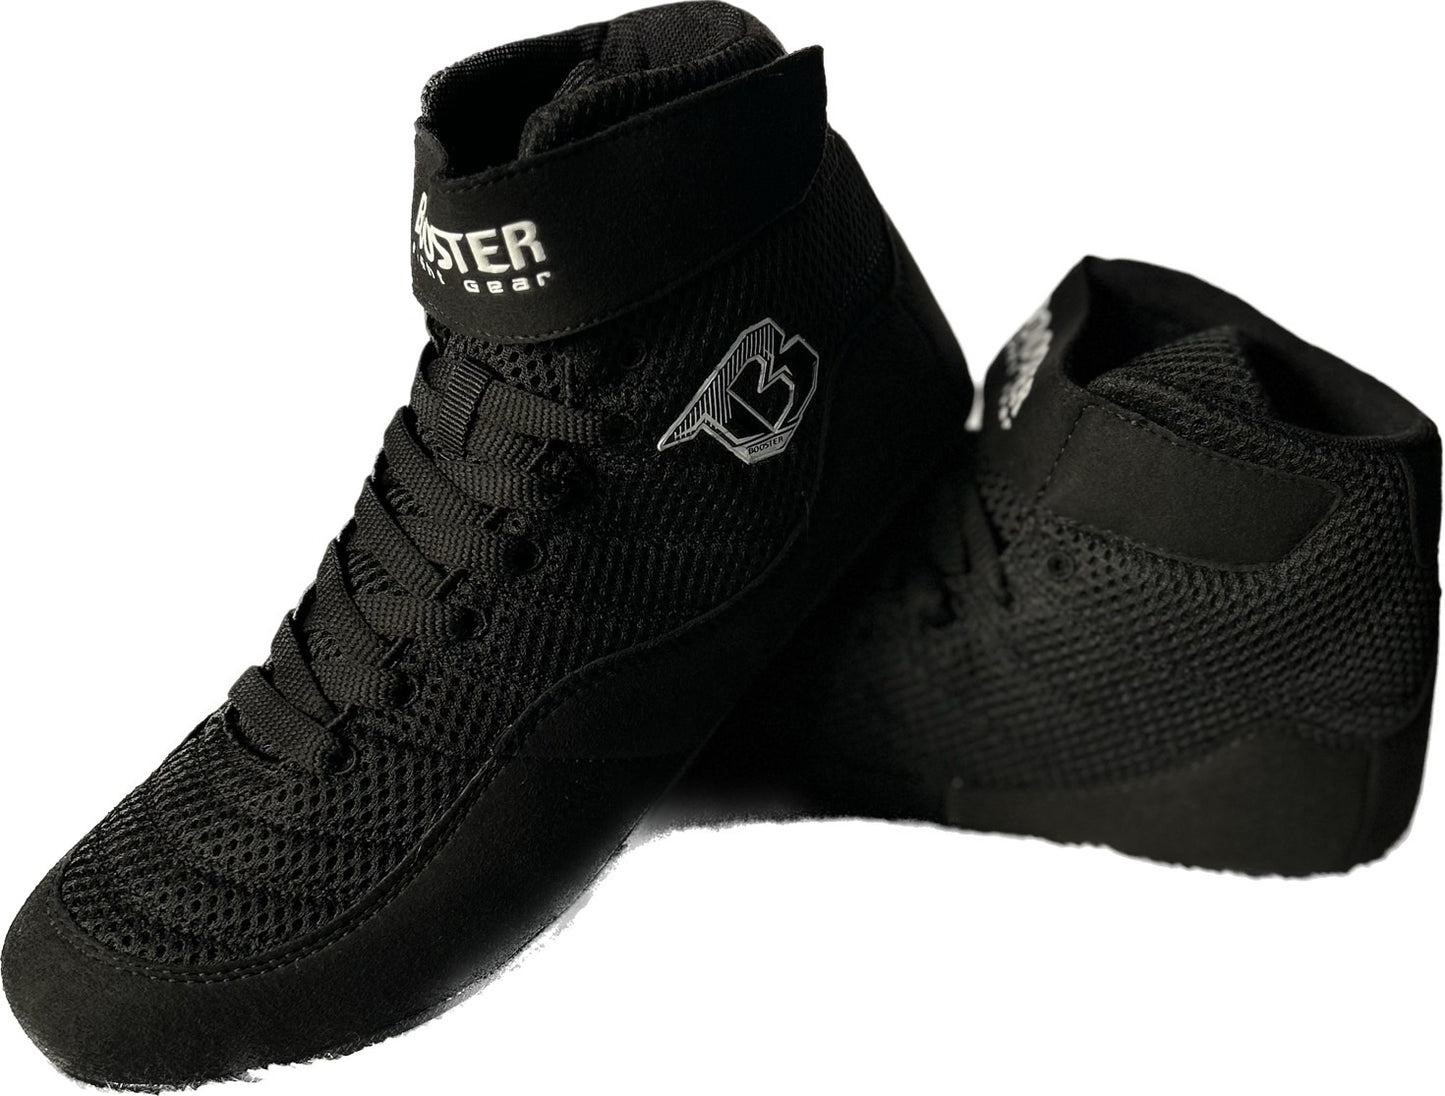 Booster Boxing Shoes Black